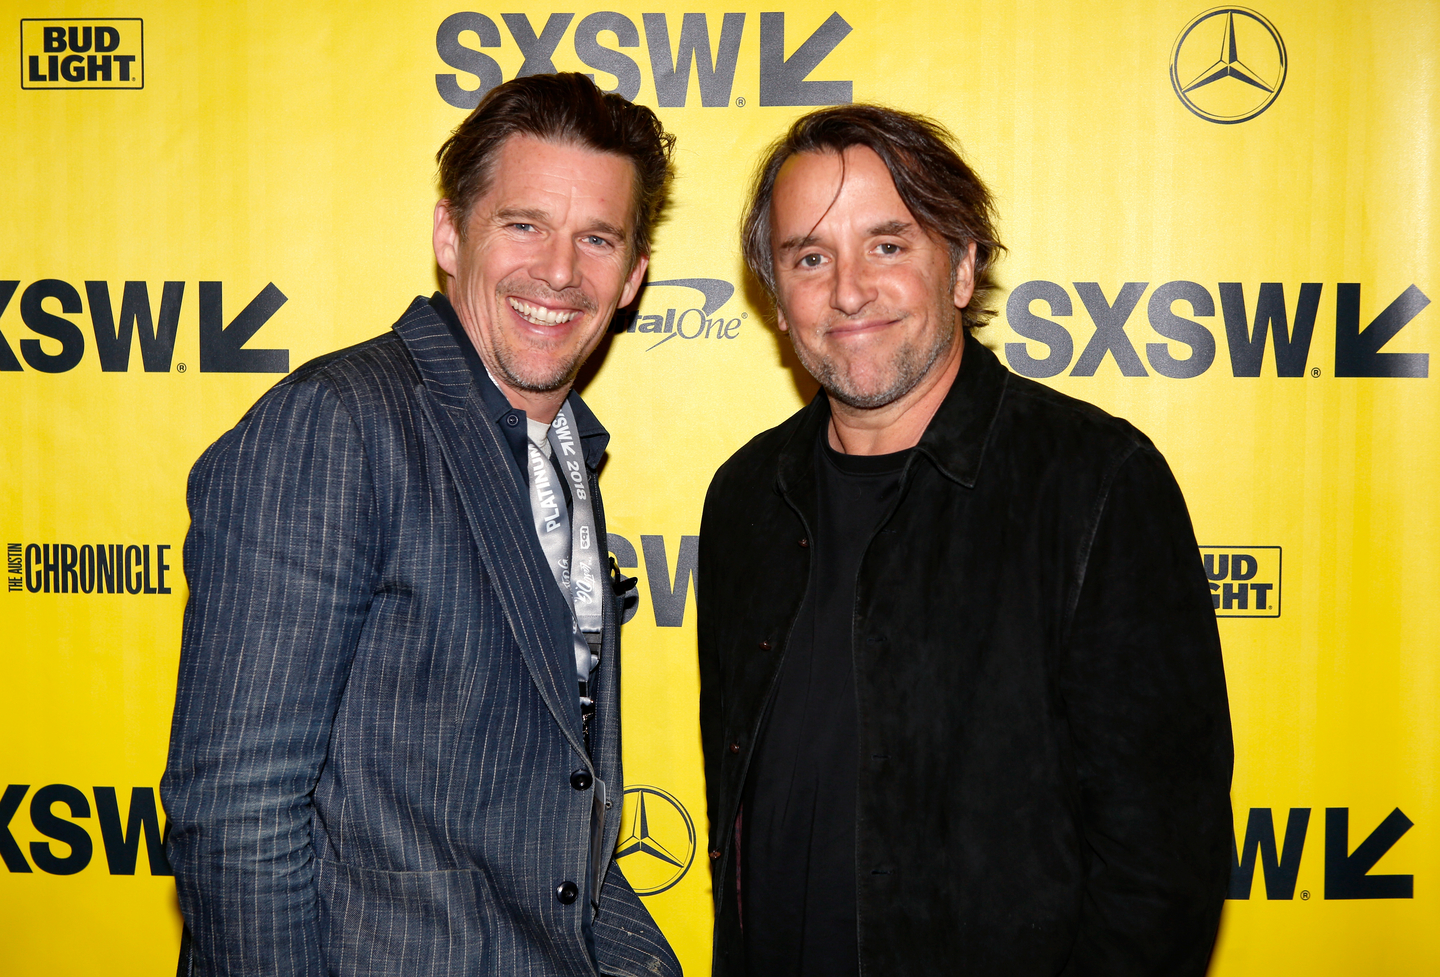 Ethan Hawke (L) and Richard Linklater at the First Reformed Screening. Photo by Sean Mathis/Getty Images for SXSW